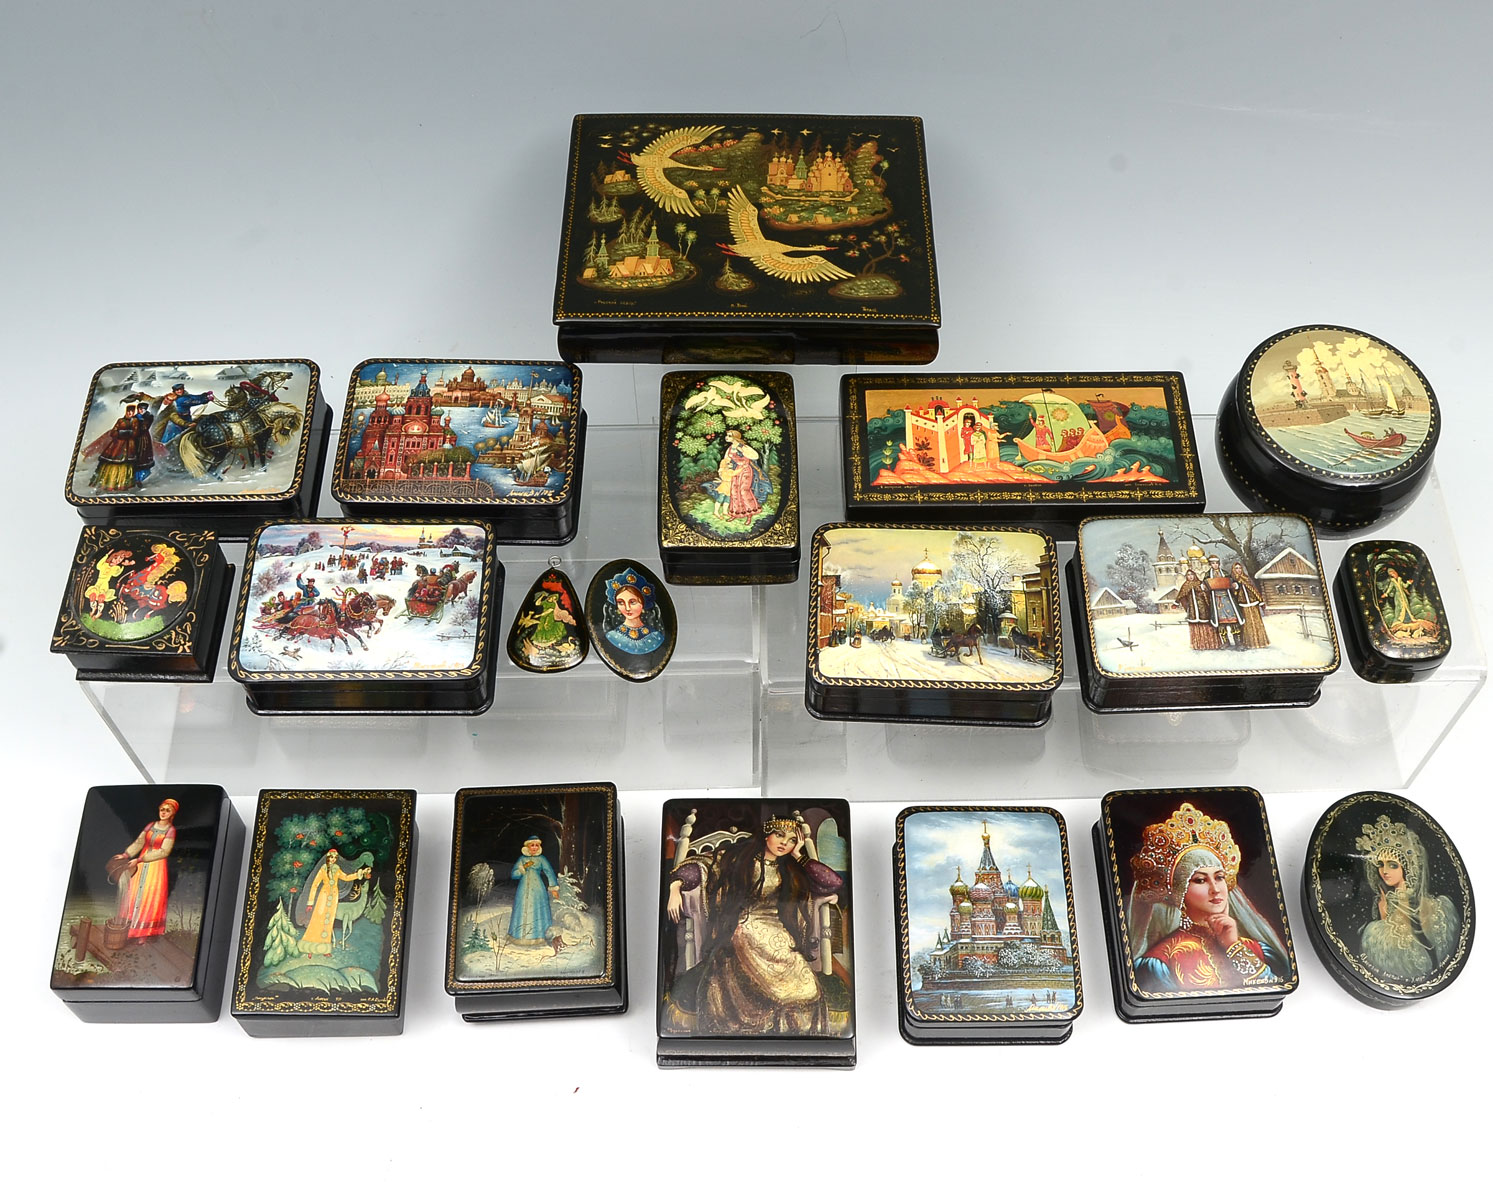 20 PC. RUSSIAN LACQUERED BOX COLLECTION: